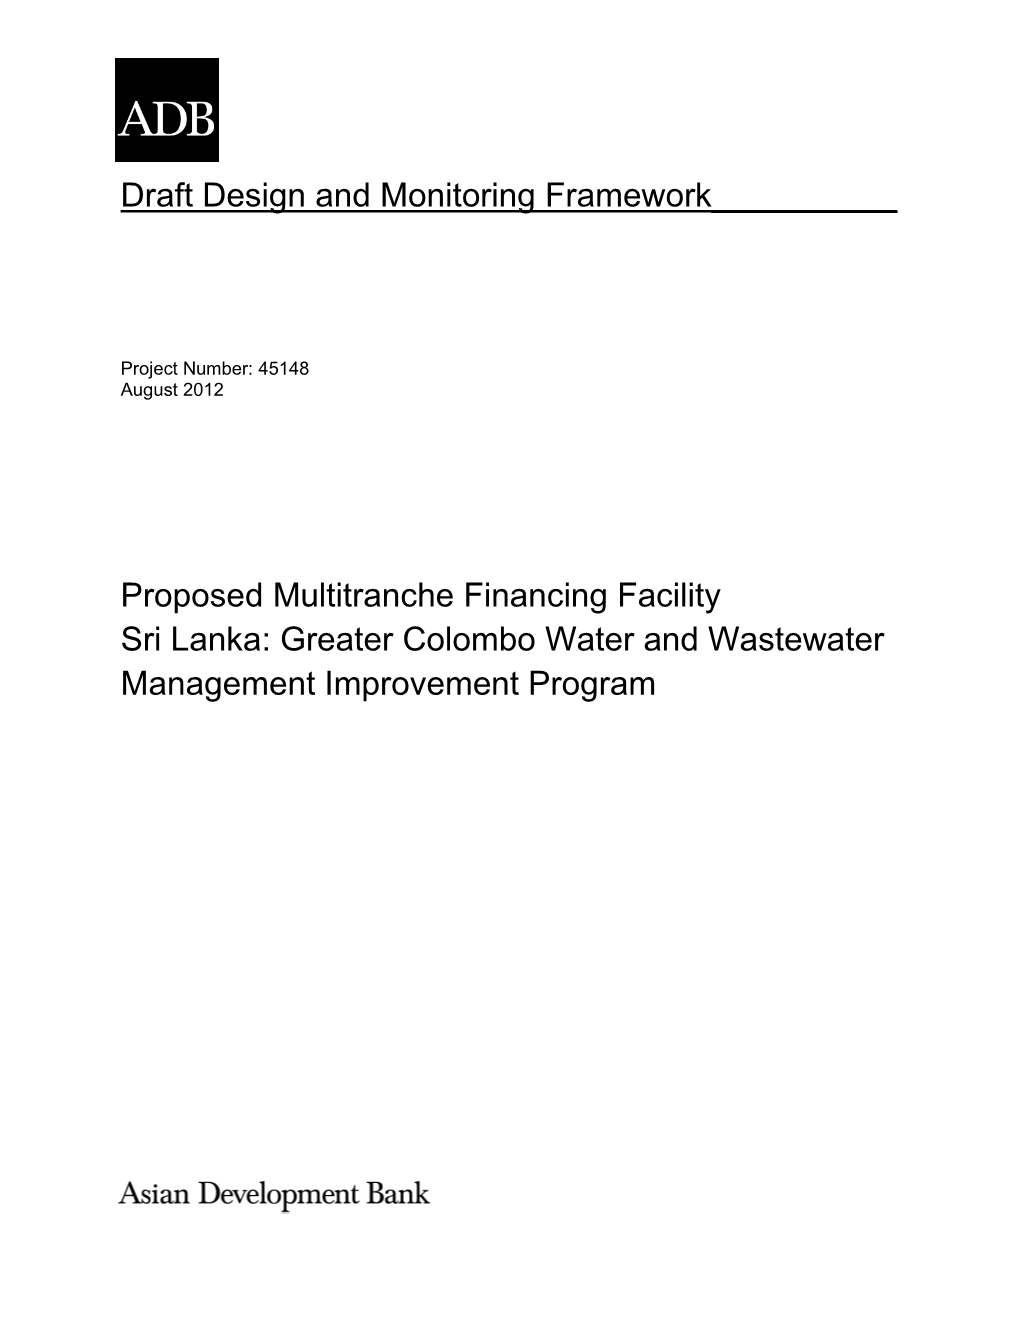 Sri Lanka: Greater Colombo Water and Wastewater Management Improvement Program